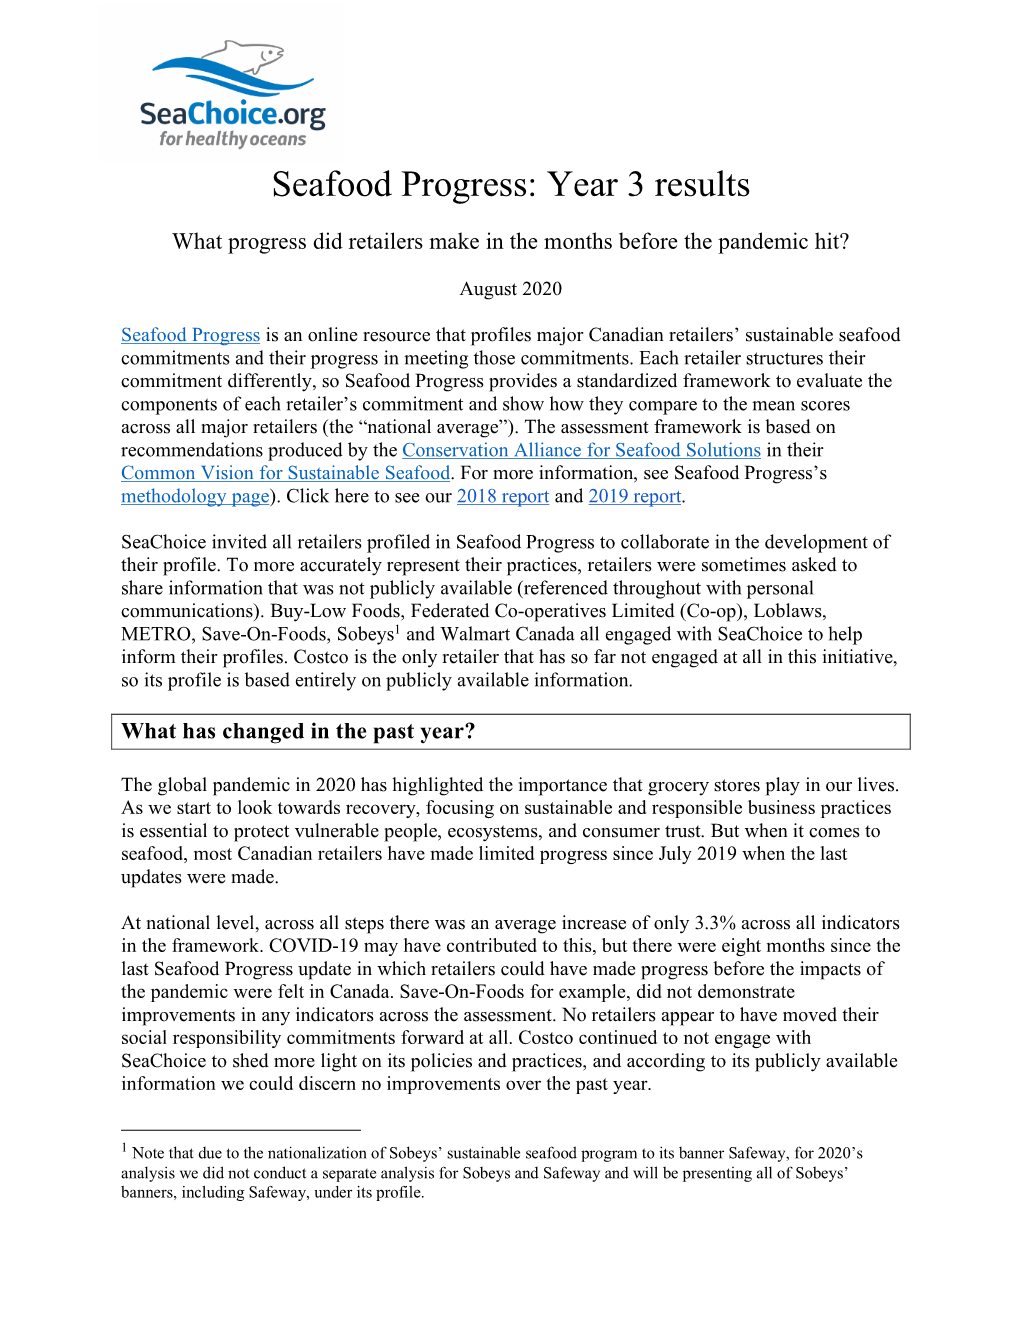 Seafood Progress: Year 3 Results